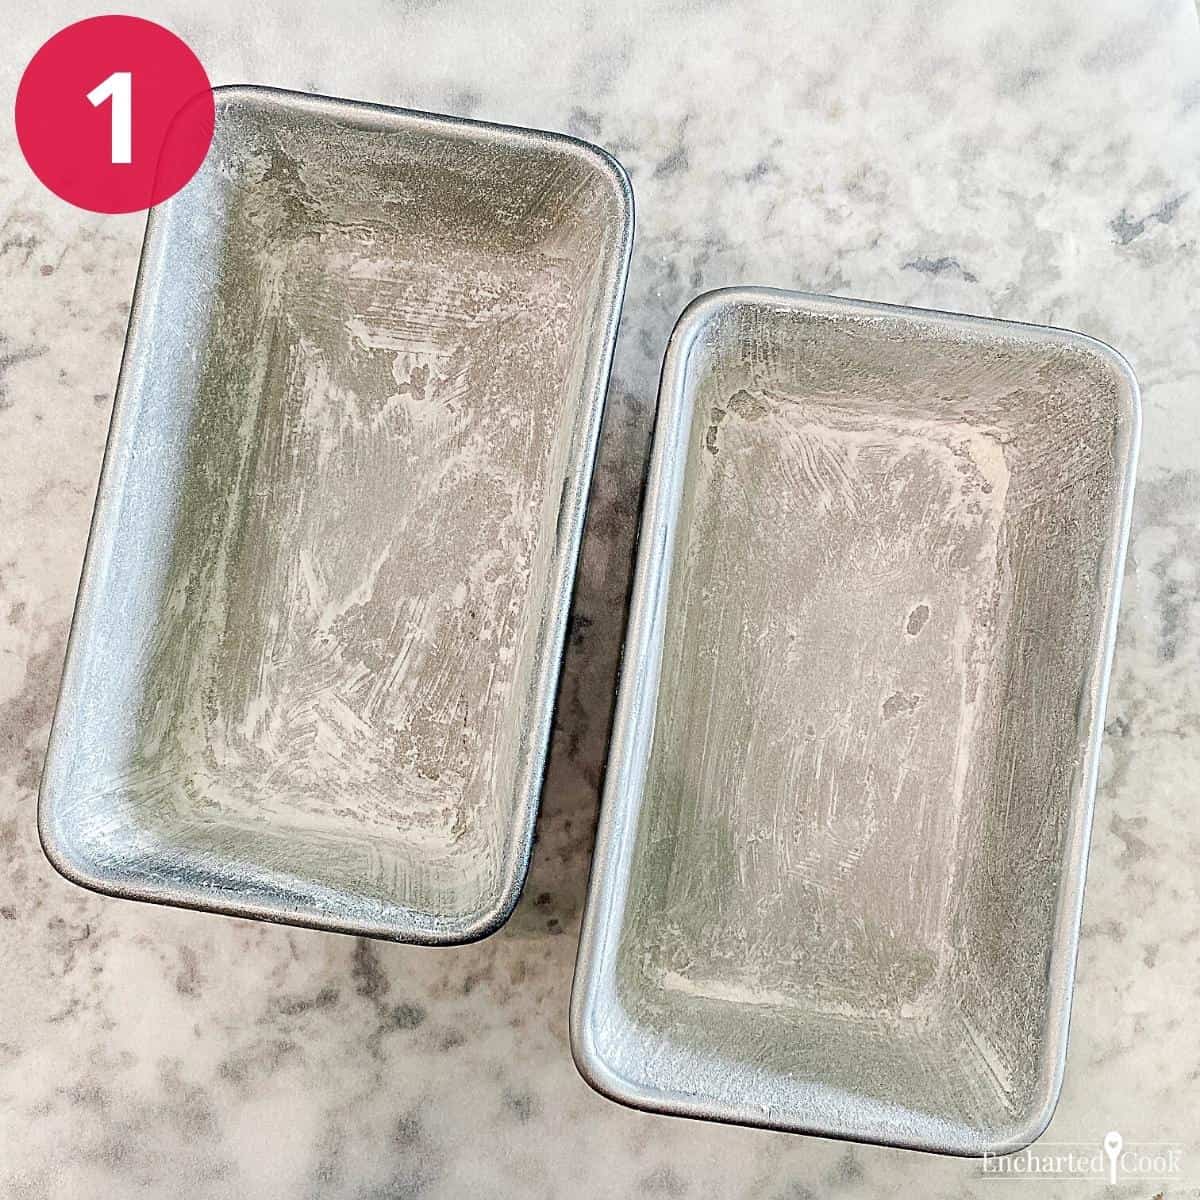 Two 9"x3" loaf pans greased and floured.